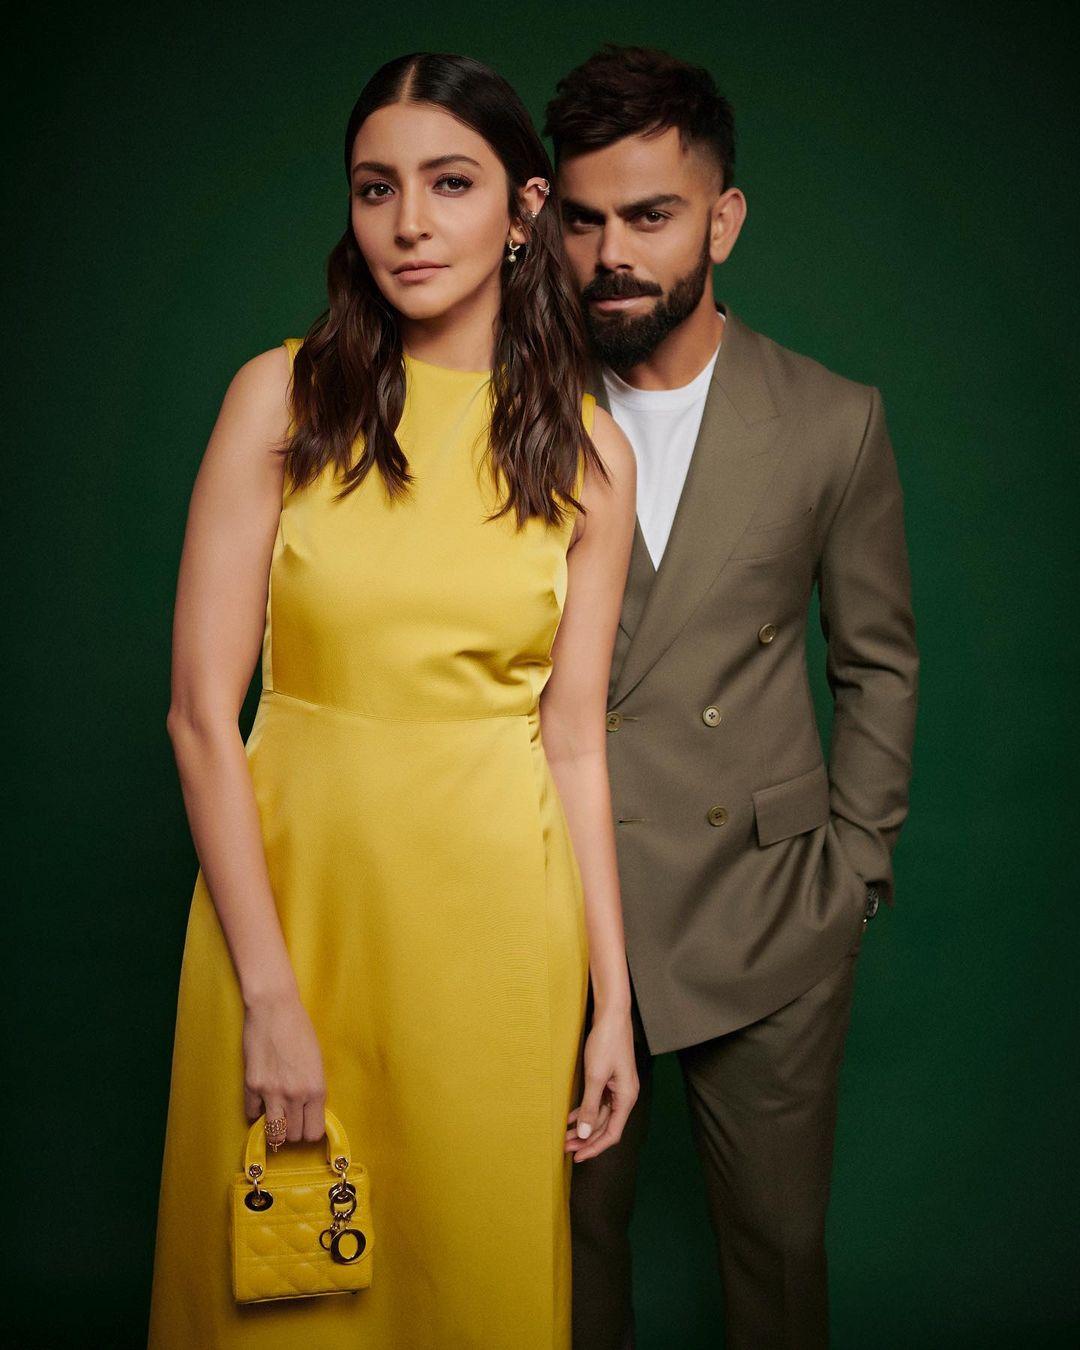 In this look, Virat Kohli opted for an olive-coloured three-piece suit that will make your girl fall in love with you all over again. Anushka's pretty yellow dress is surely going to earn you a lot of praises